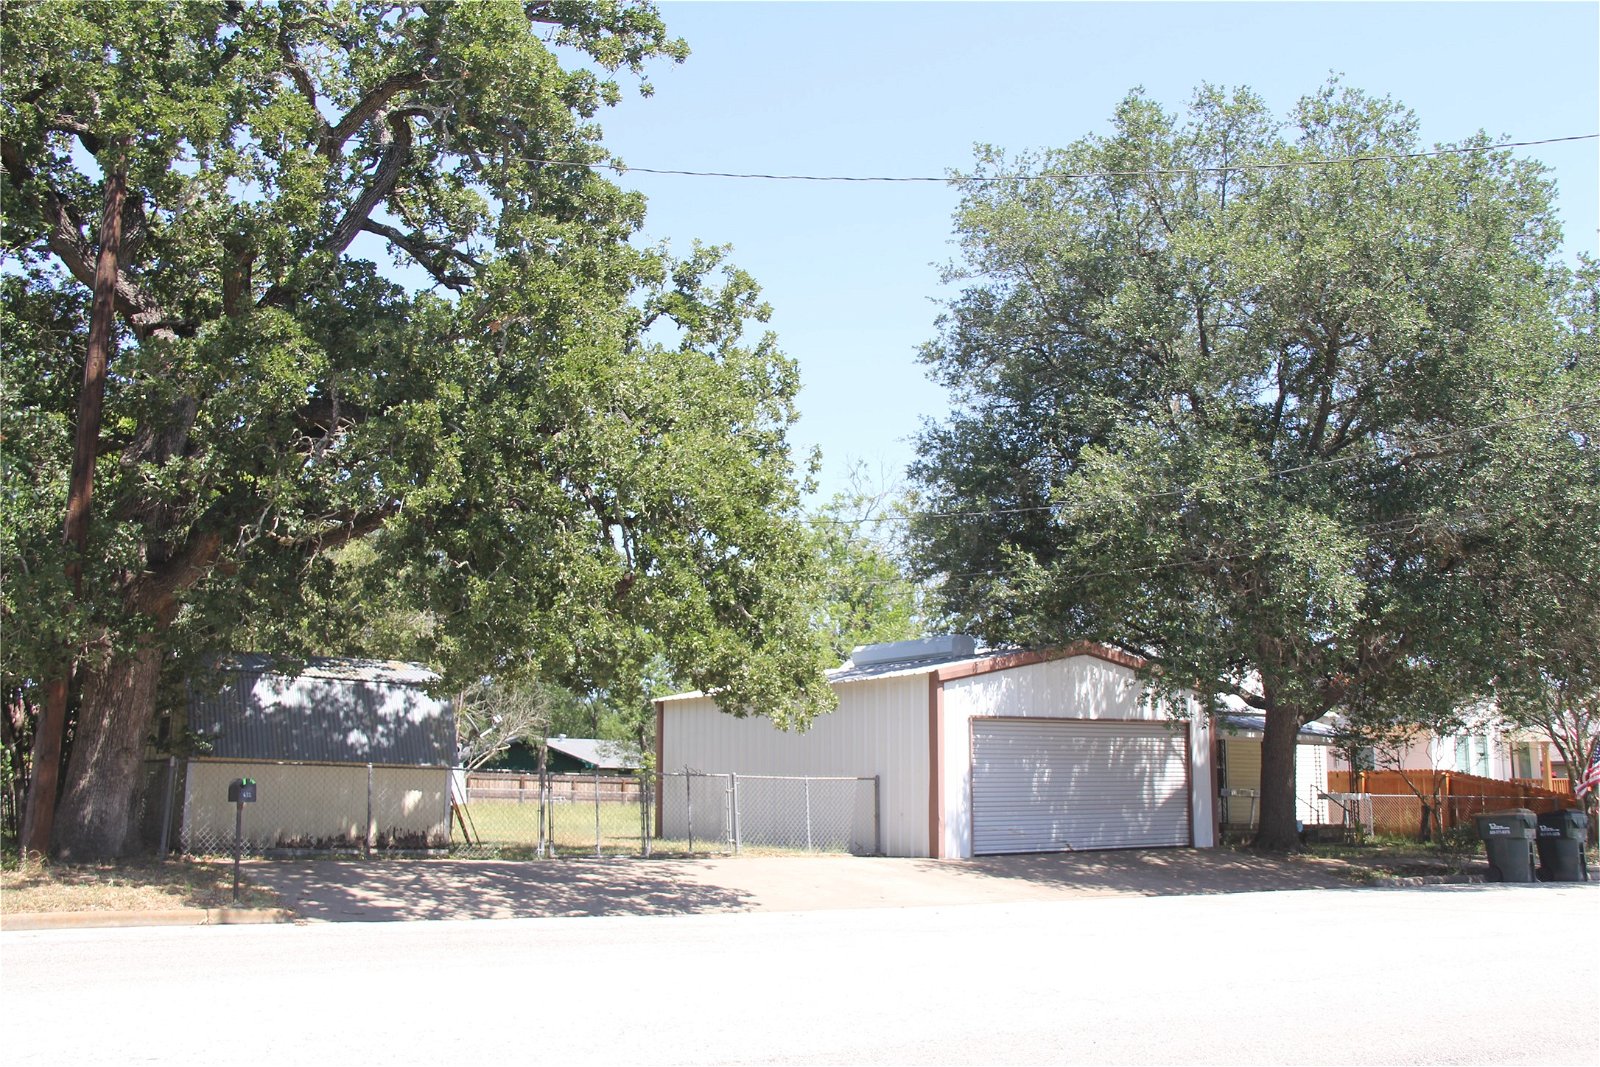 Real estate property located at 650 Leon, Lee, Ot Giddings, Giddings, TX, US